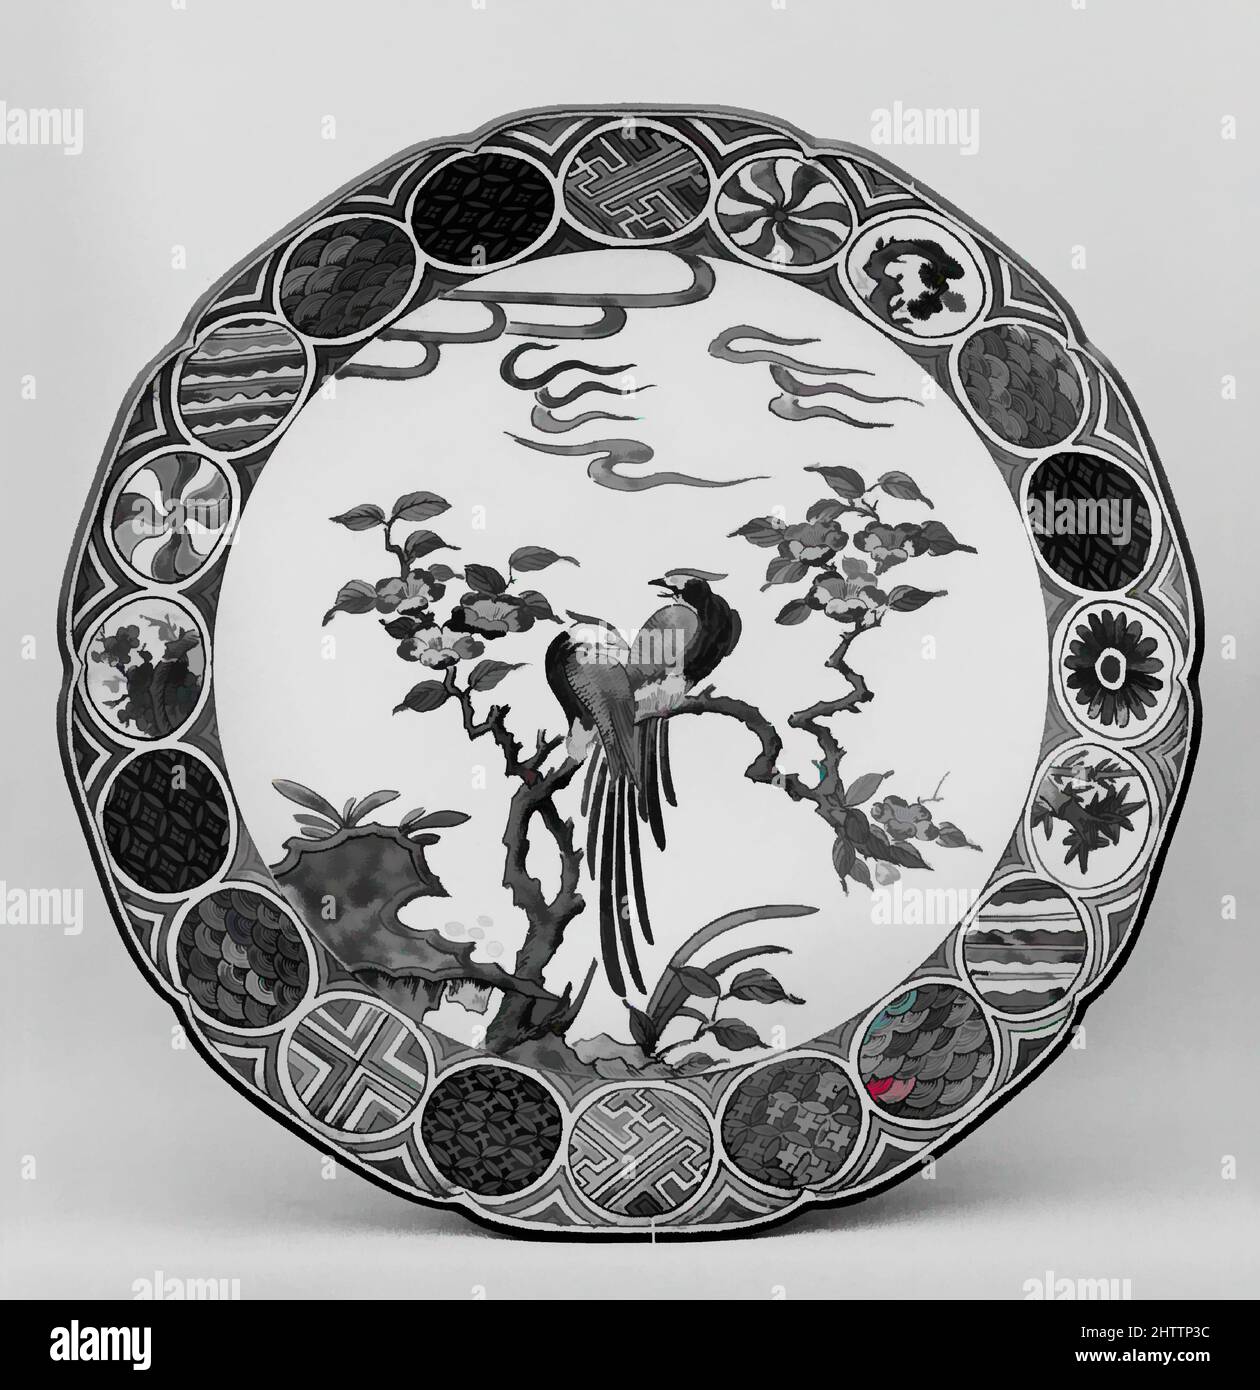 Art inspired by Plate, 19th century, Japan, Pottery decorated in polychrome enamels (Hizen ware, Kutani type), Diam. 12 3/4 in. (32.4 cm), Ceramics, Classic works modernized by Artotop with a splash of modernity. Shapes, color and value, eye-catching visual impact on art. Emotions through freedom of artworks in a contemporary way. A timeless message pursuing a wildly creative new direction. Artists turning to the digital medium and creating the Artotop NFT Stock Photo